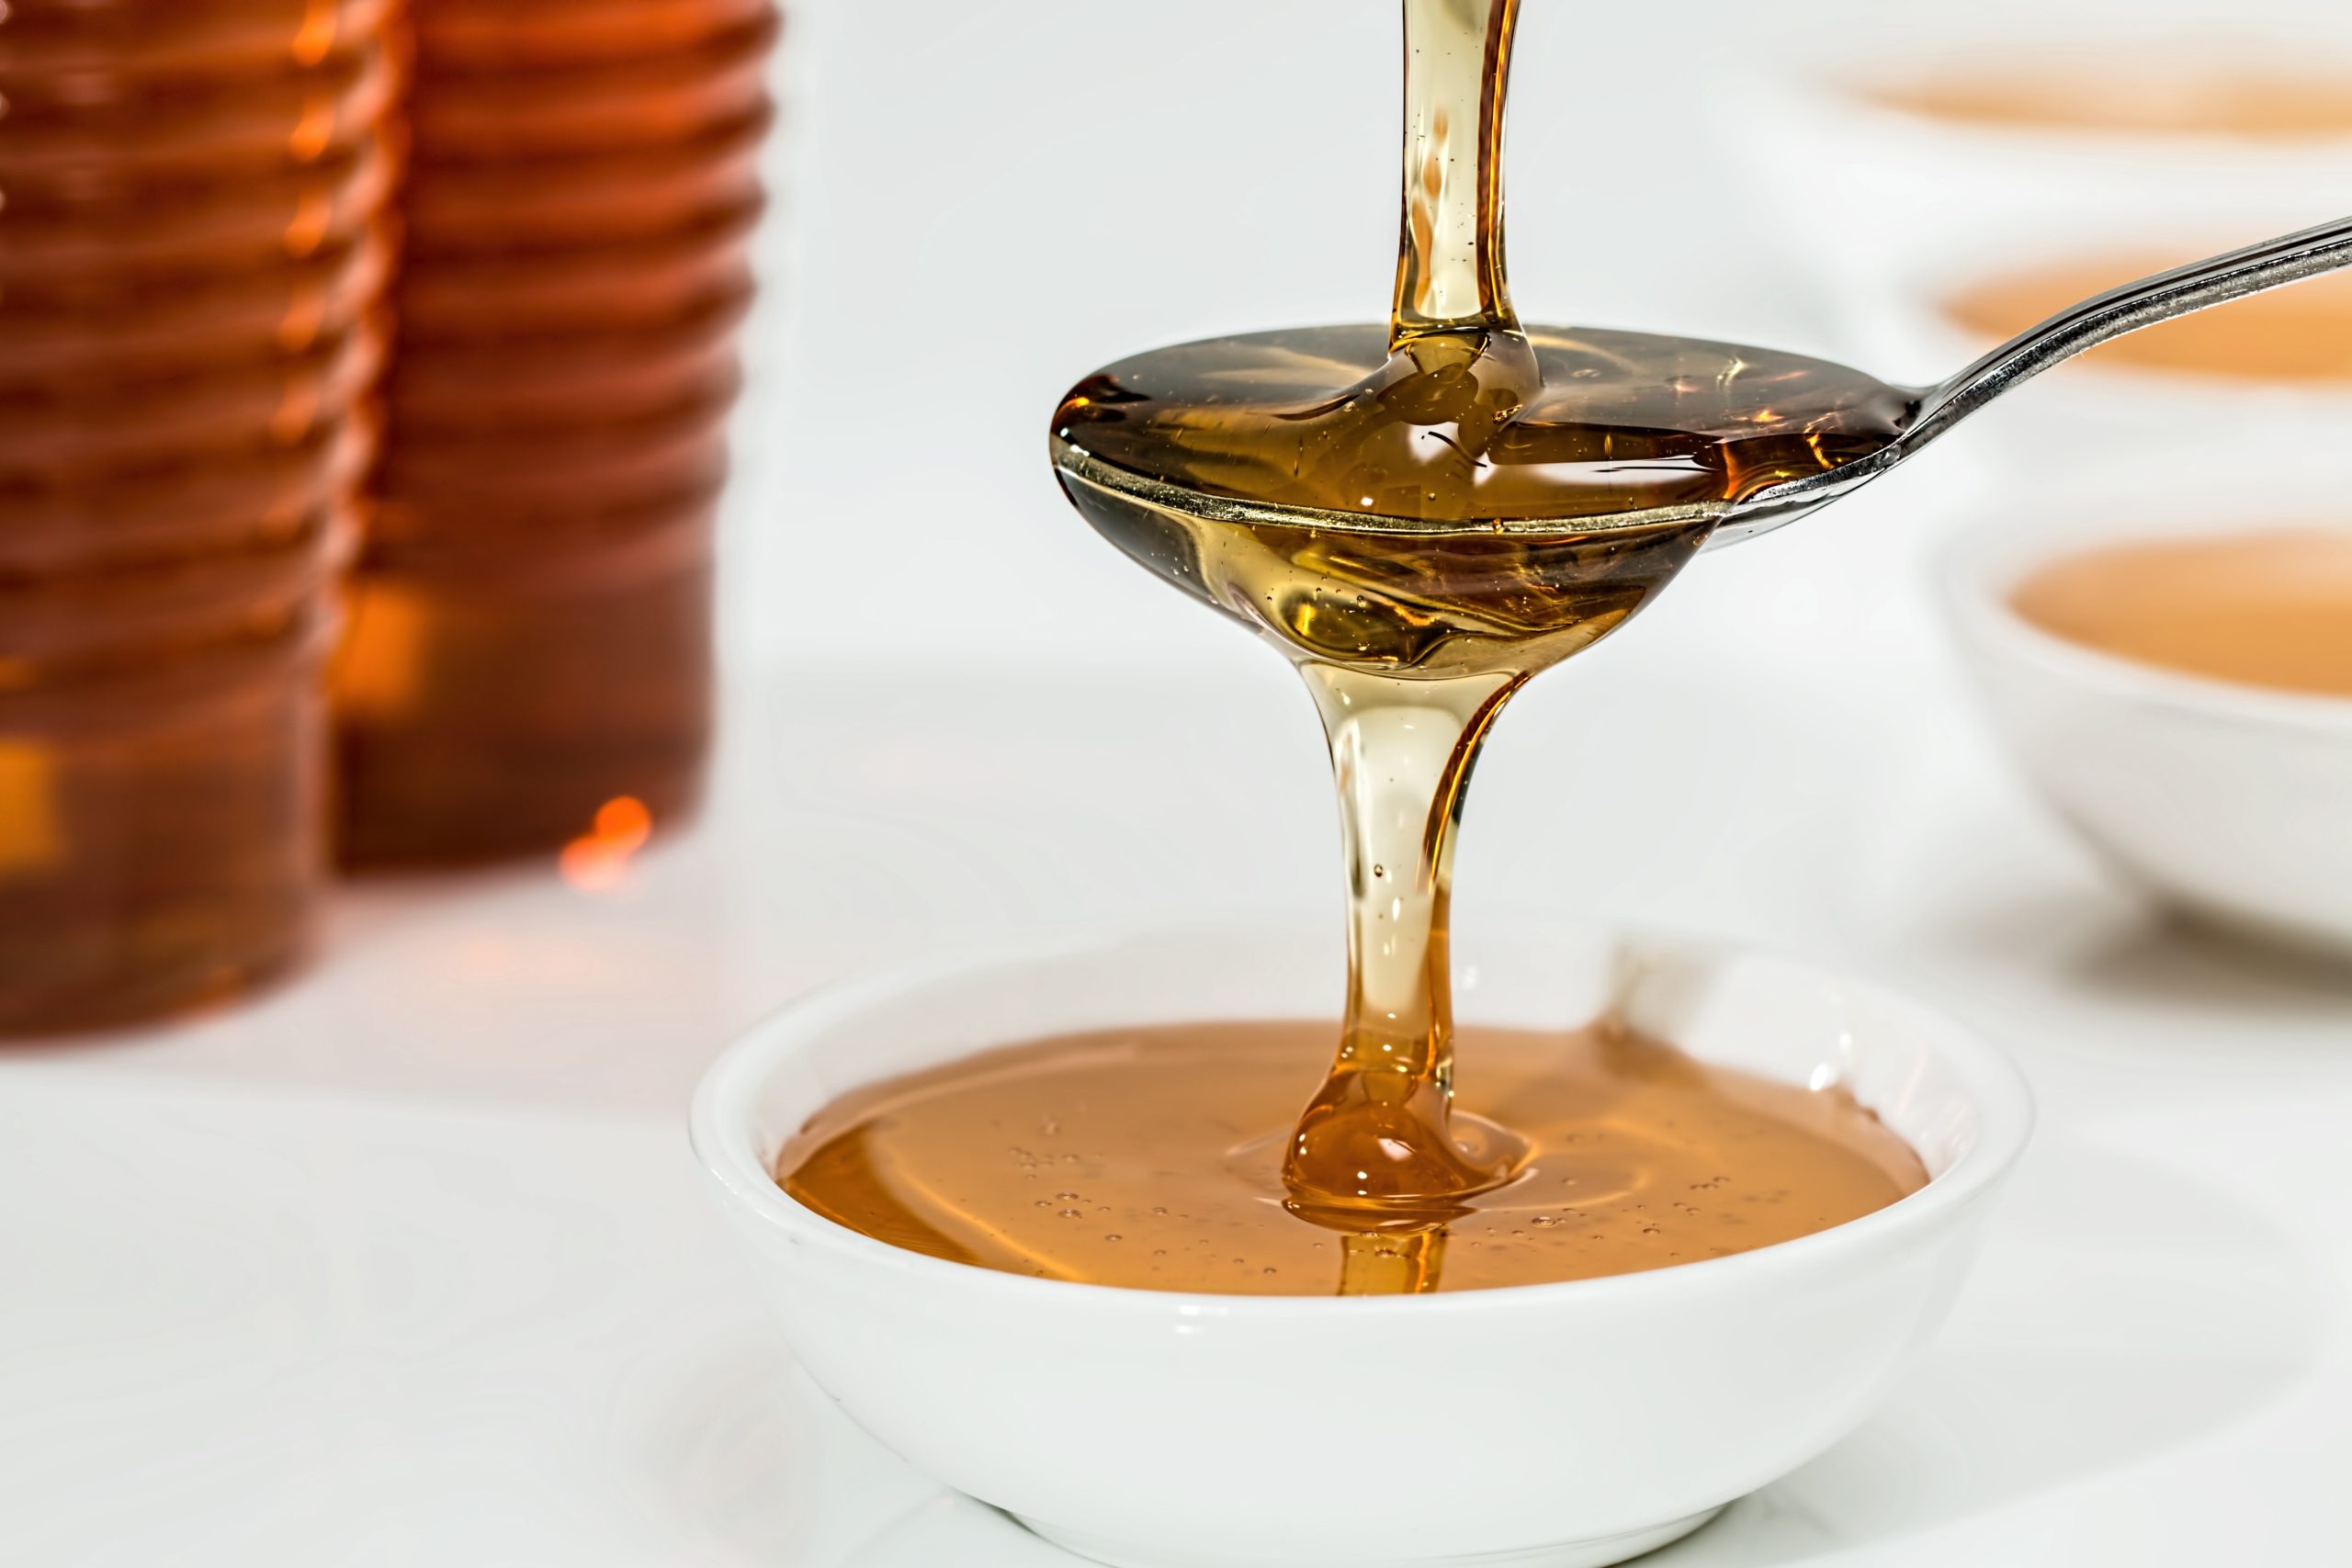 Discovering The Best Manuka Honey In Auckland: A Guide To Buying The Real Deal